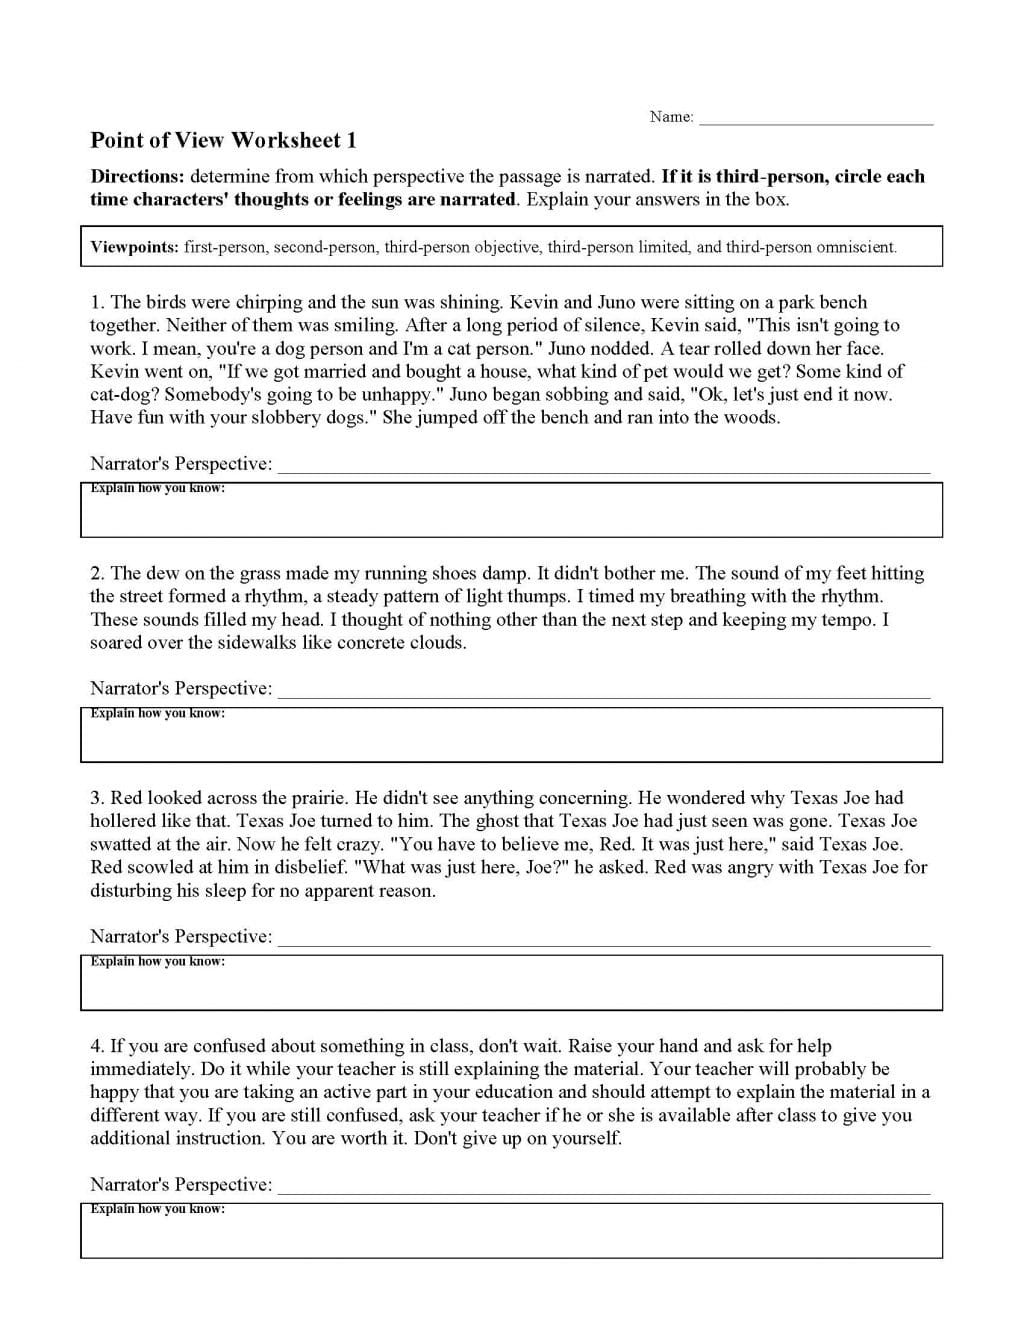 Worksheet Ideas  Authoramp039S Point Of View Worksheets For Analyzing Author039S Claims Worksheet Answer Key